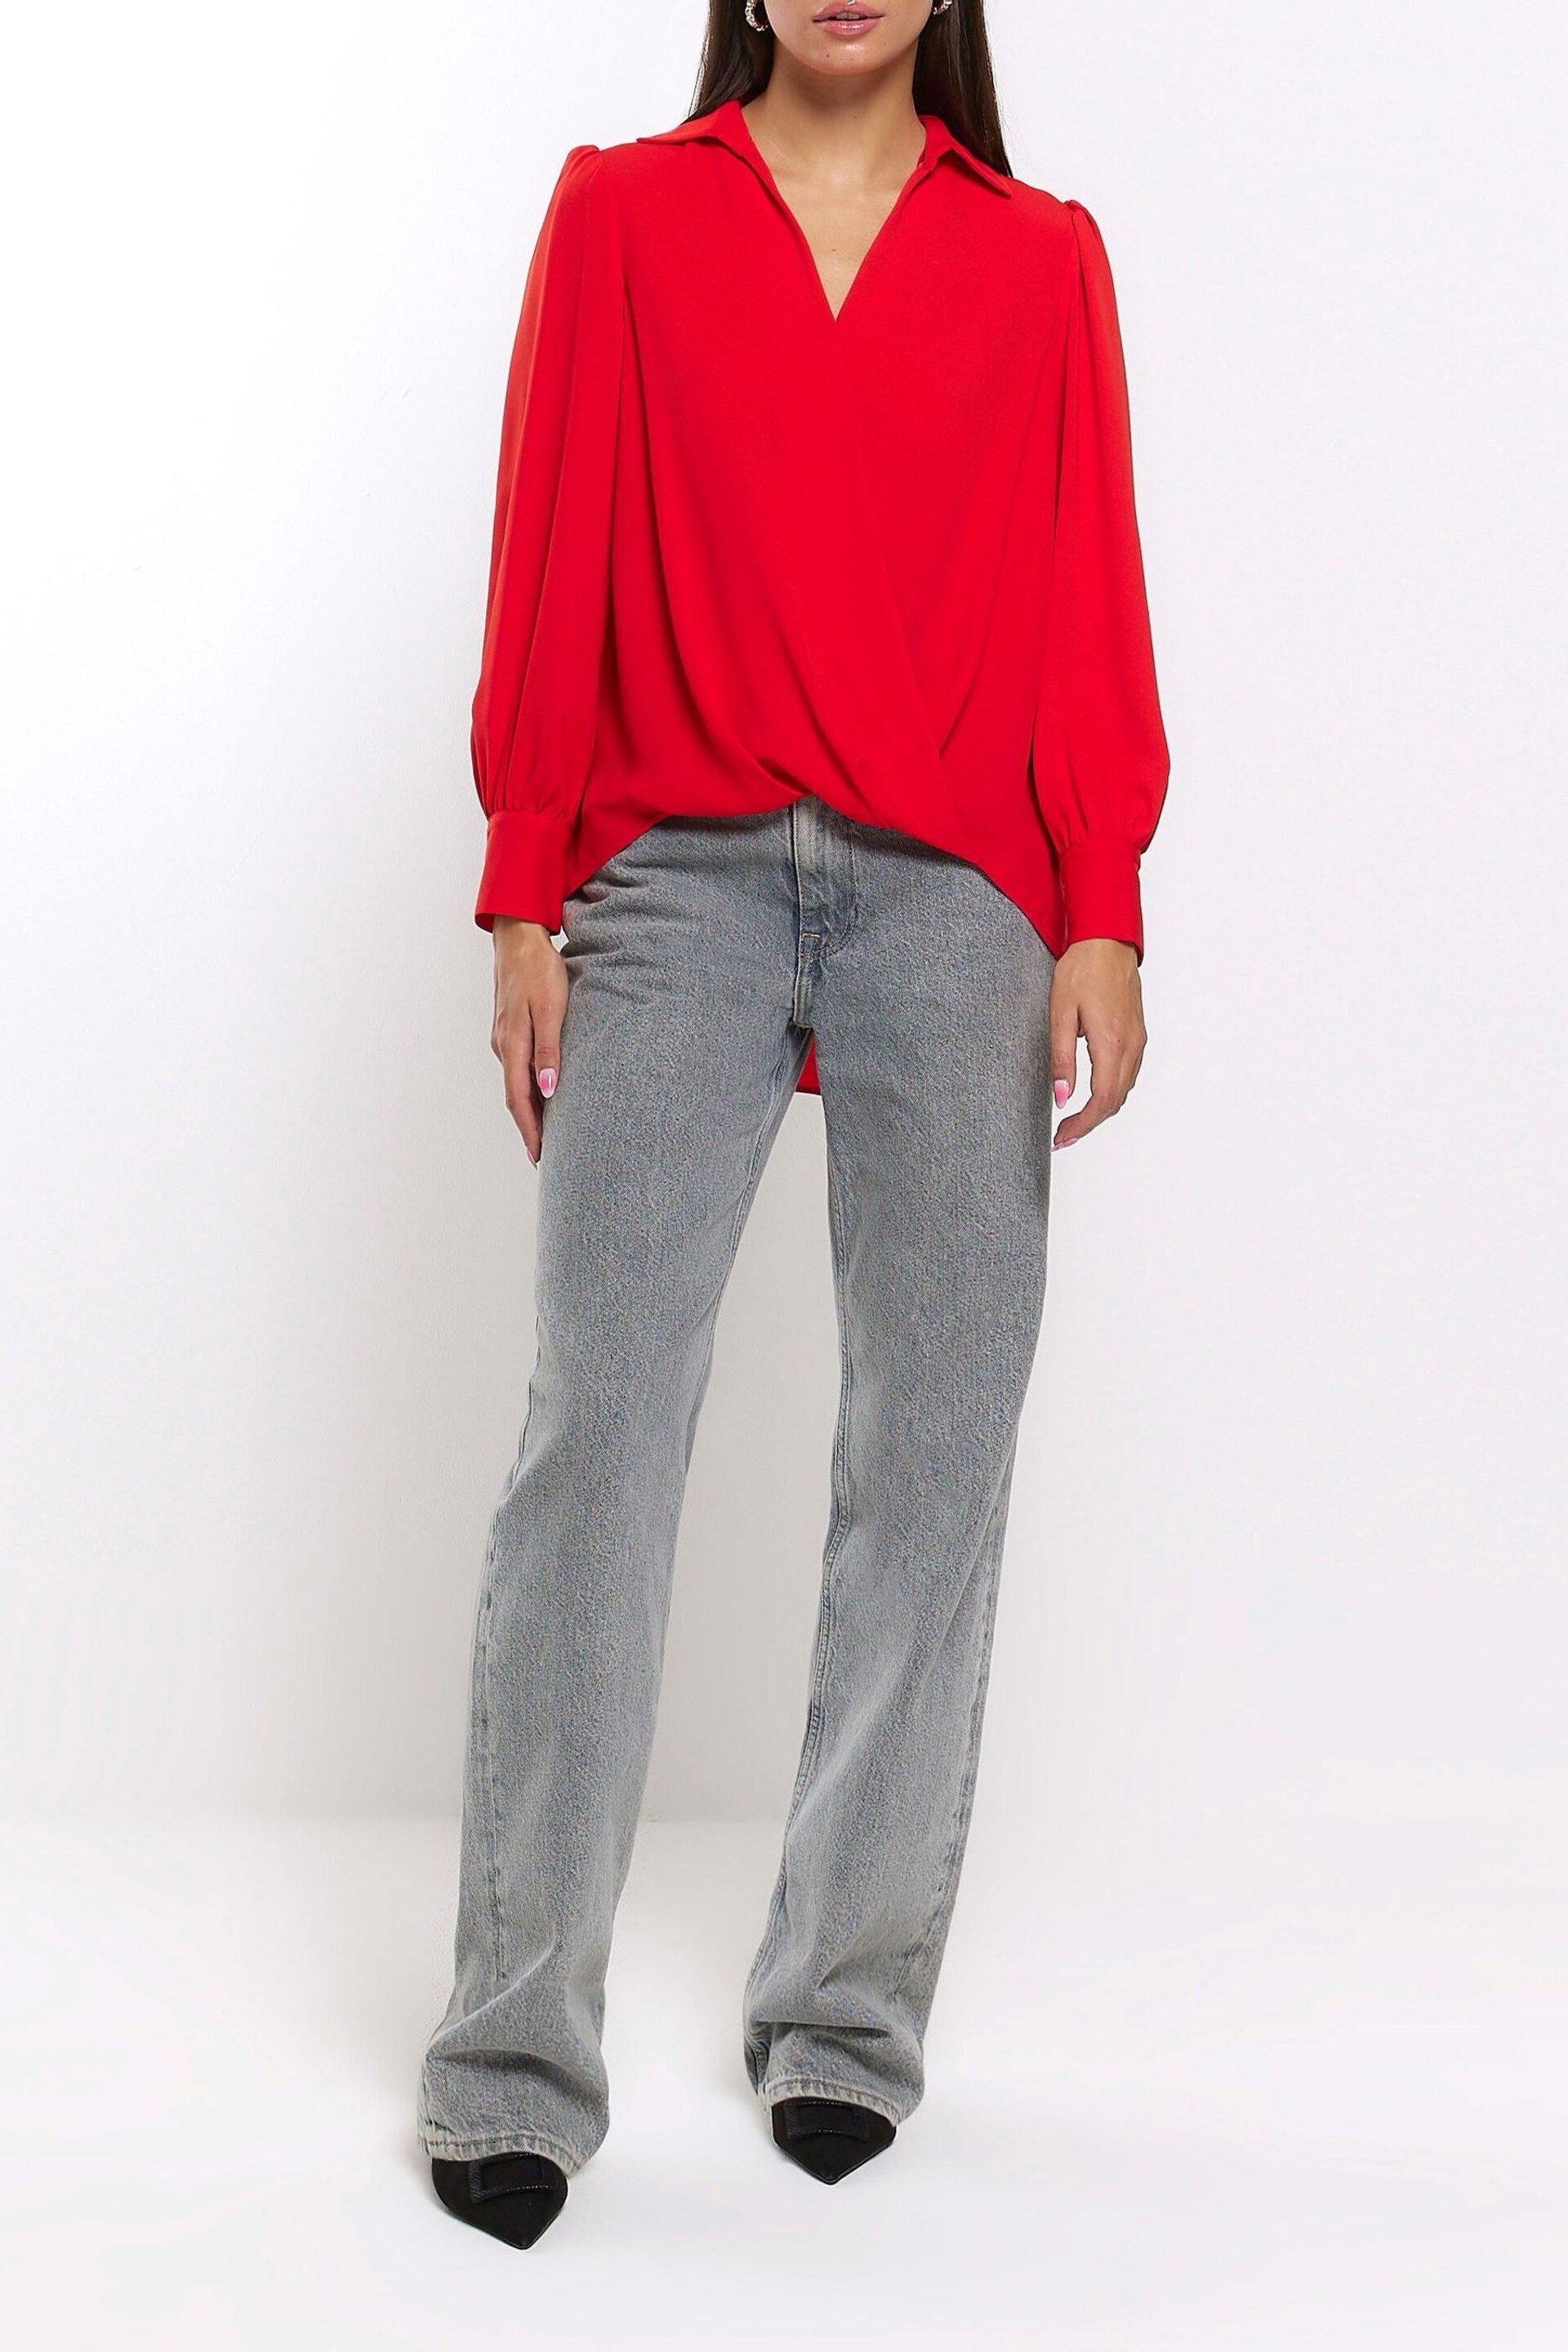 River Island Red V-Neck Wrap Blouse - Image 3 of 6